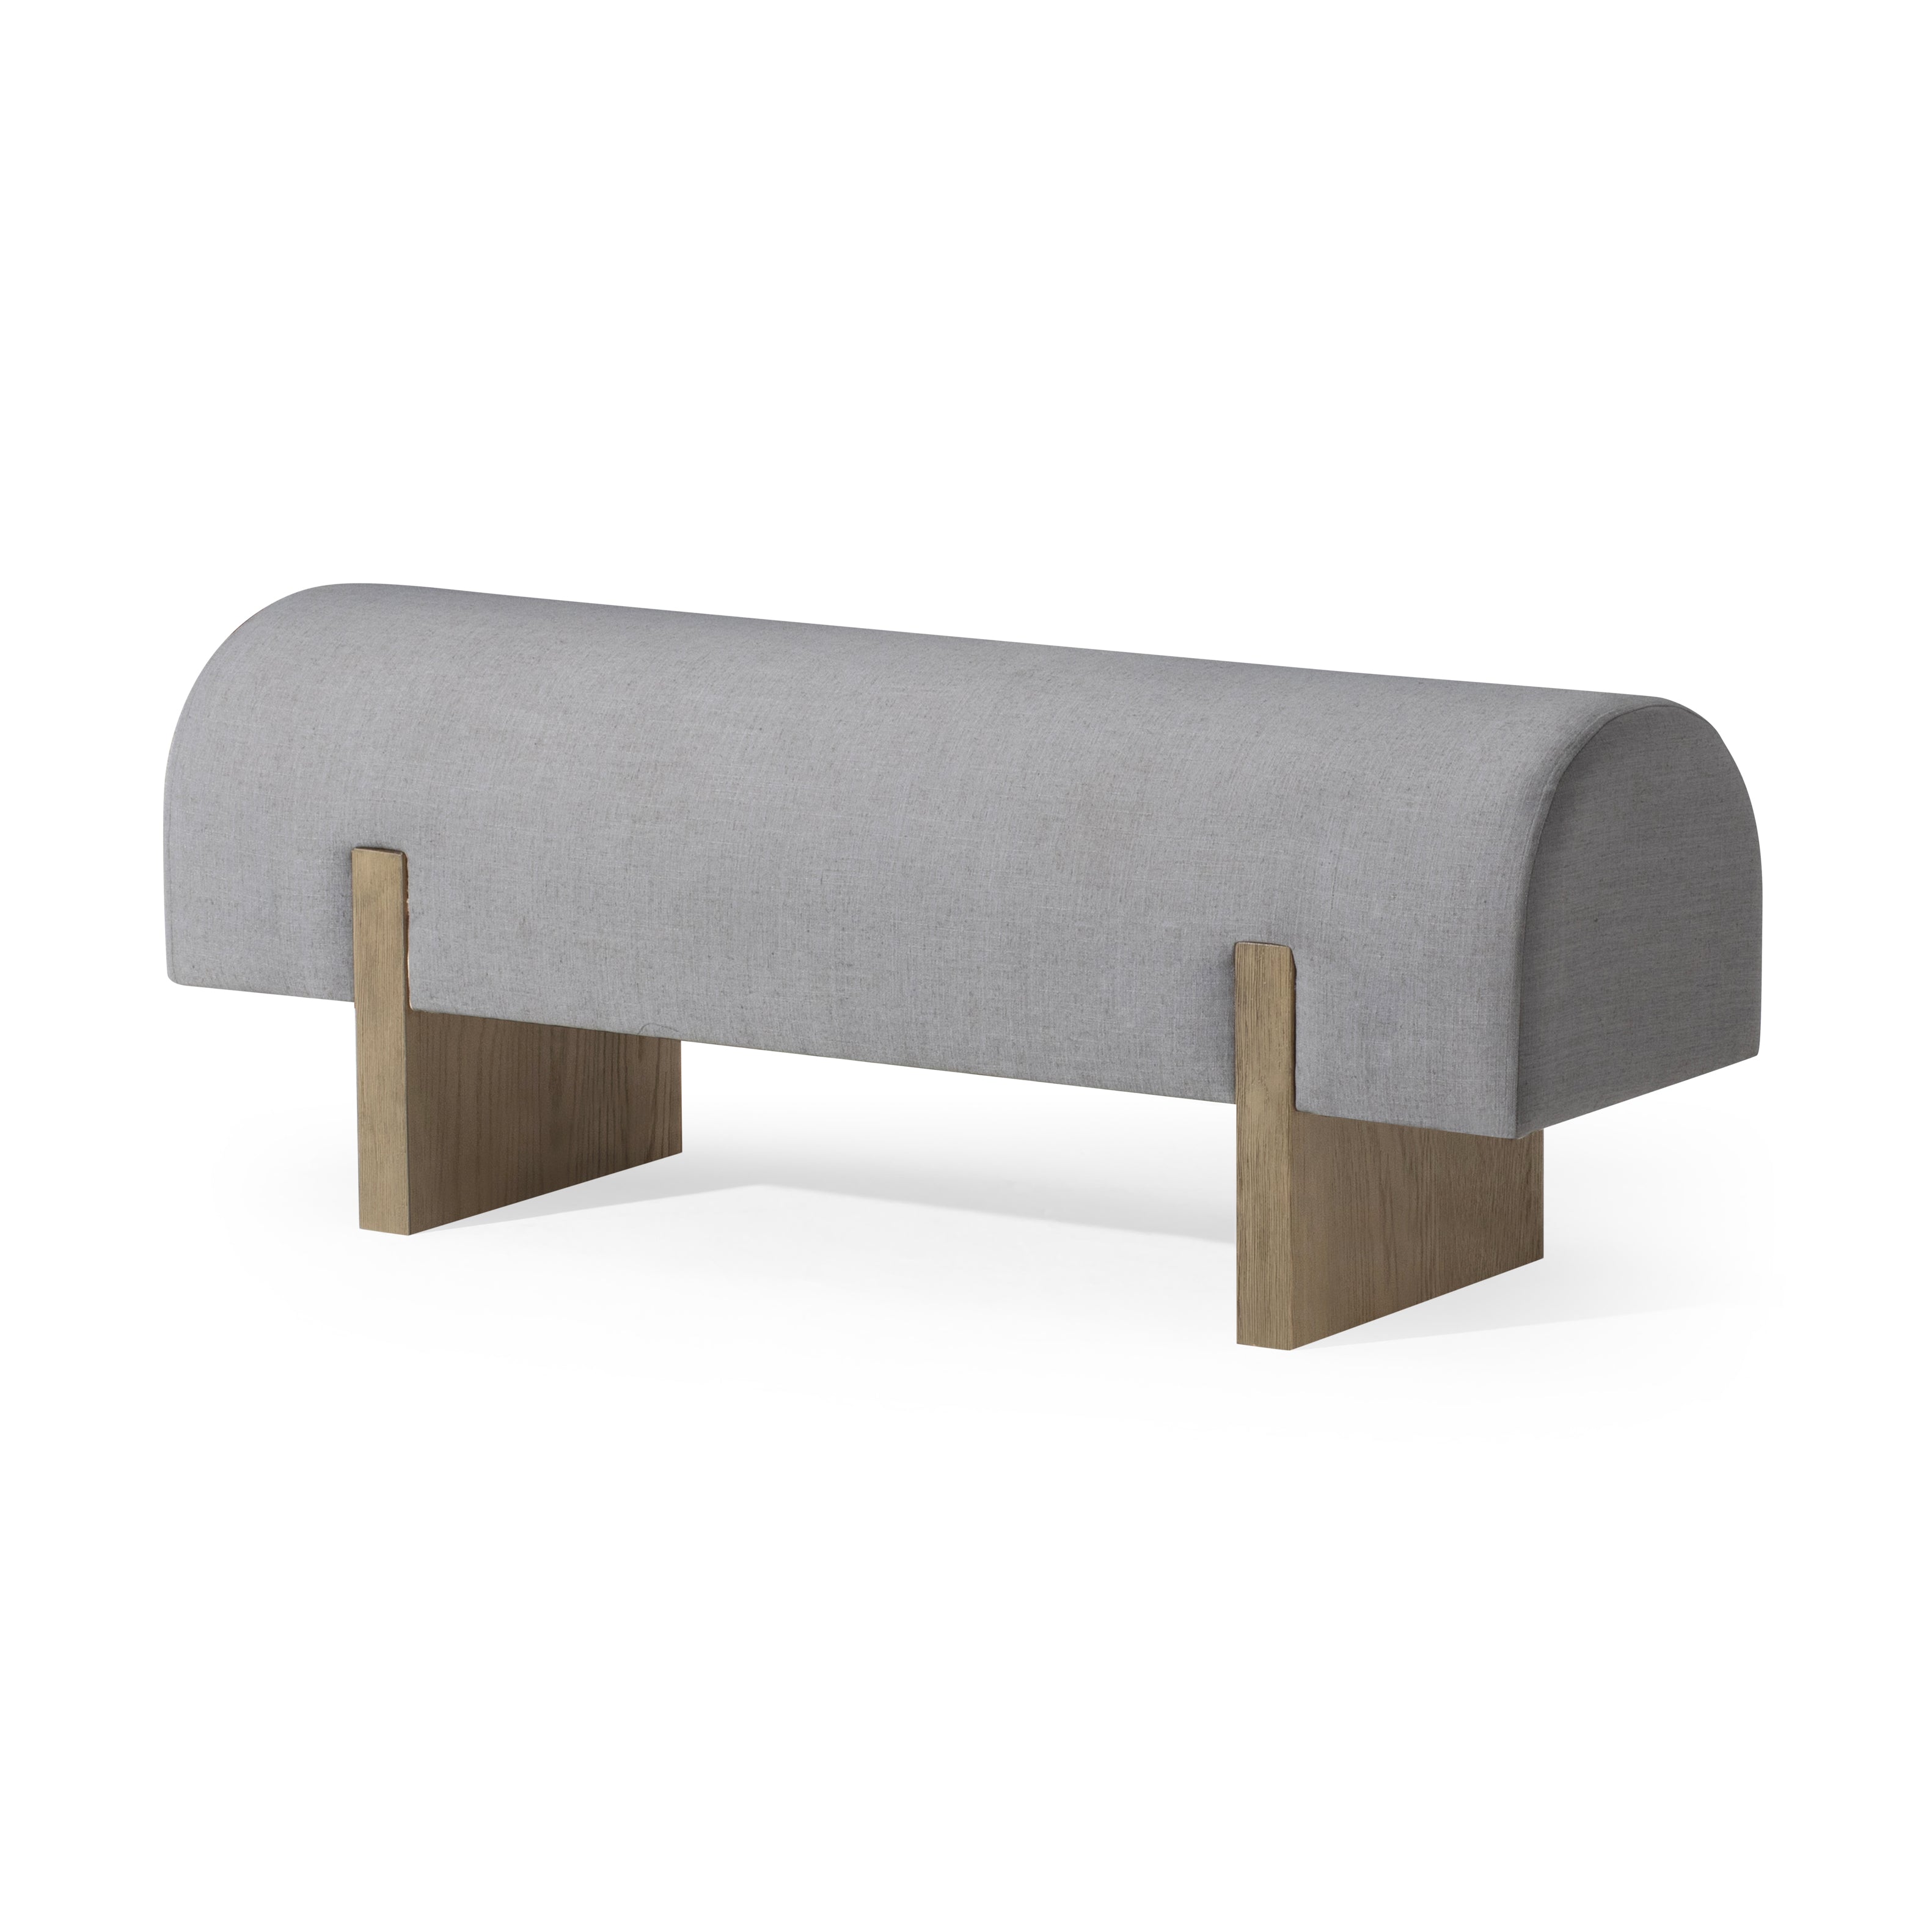 Juno Contemporary Upholstered Wooden Bench in Refined Grey Finish in Ottomans & Benches by Maven Lane